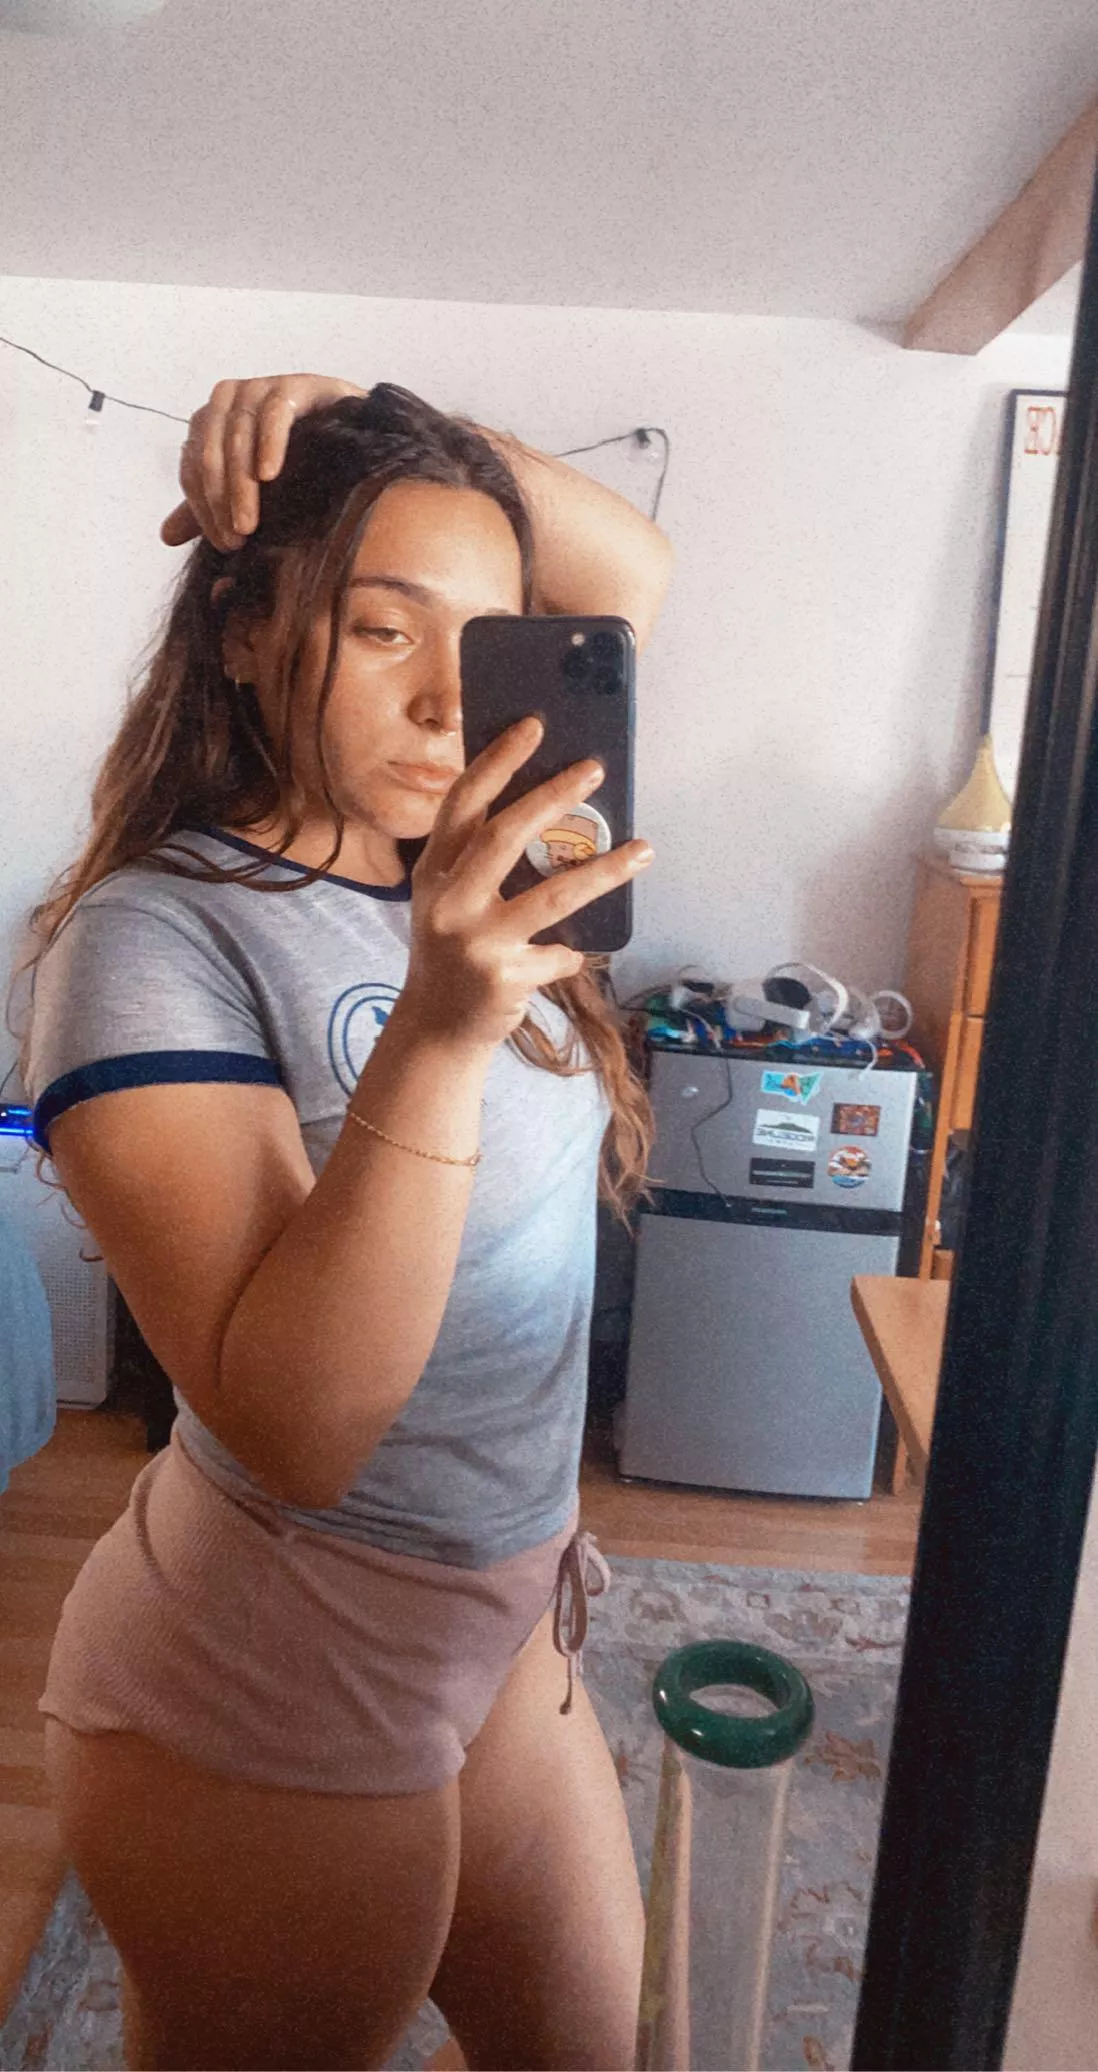 Latina Cell Phone Nudes - thicc latina queen nudes : thick | NUDE-PICS.ORG